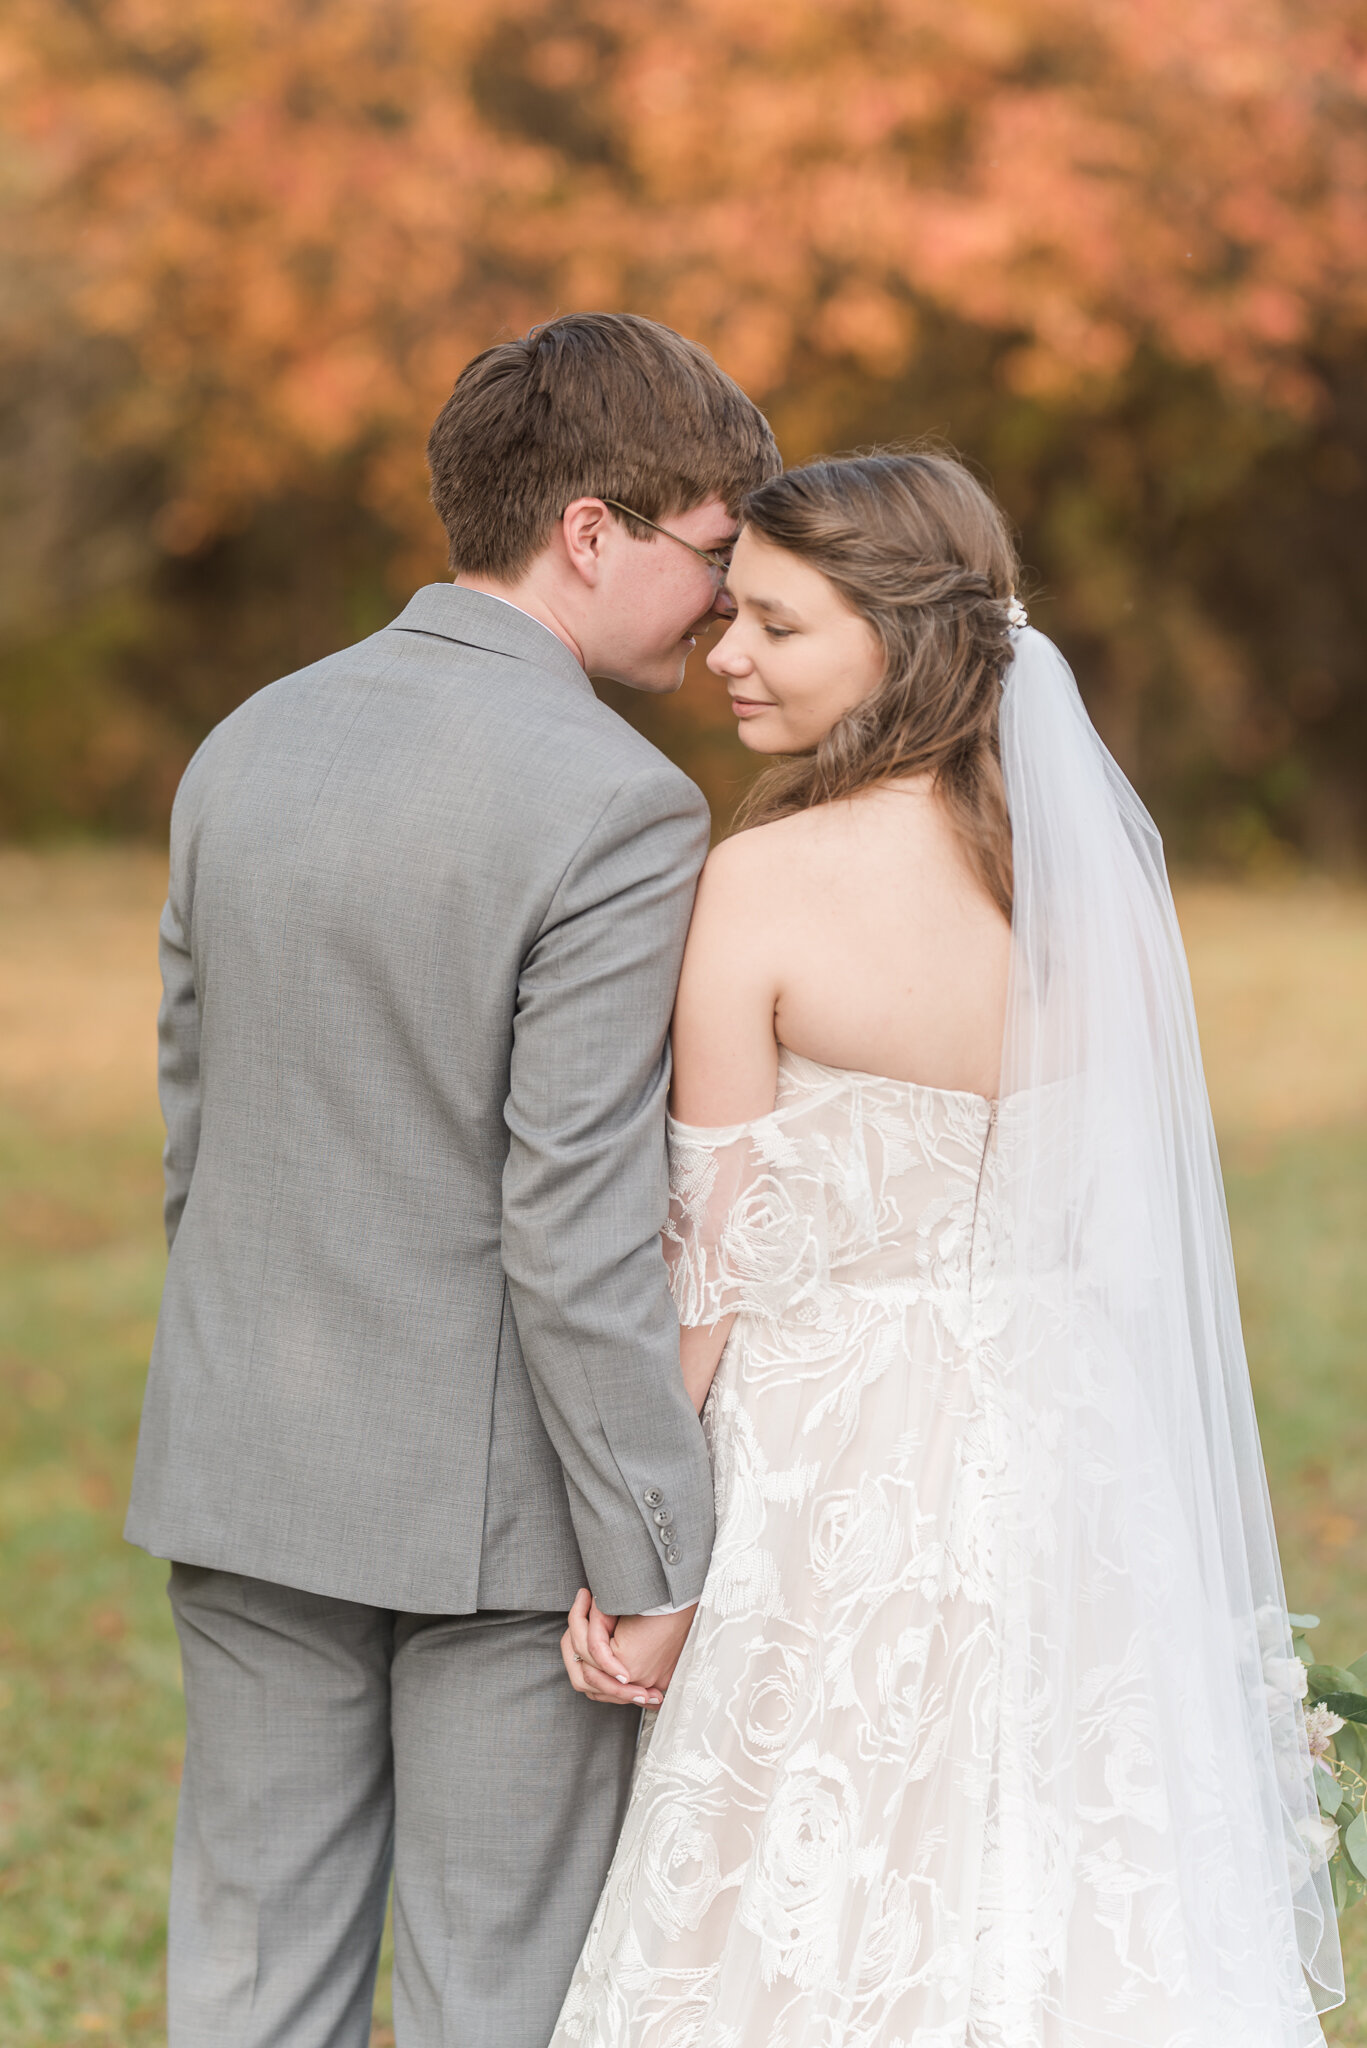 Covid Elopement In Indiana6603.jpg